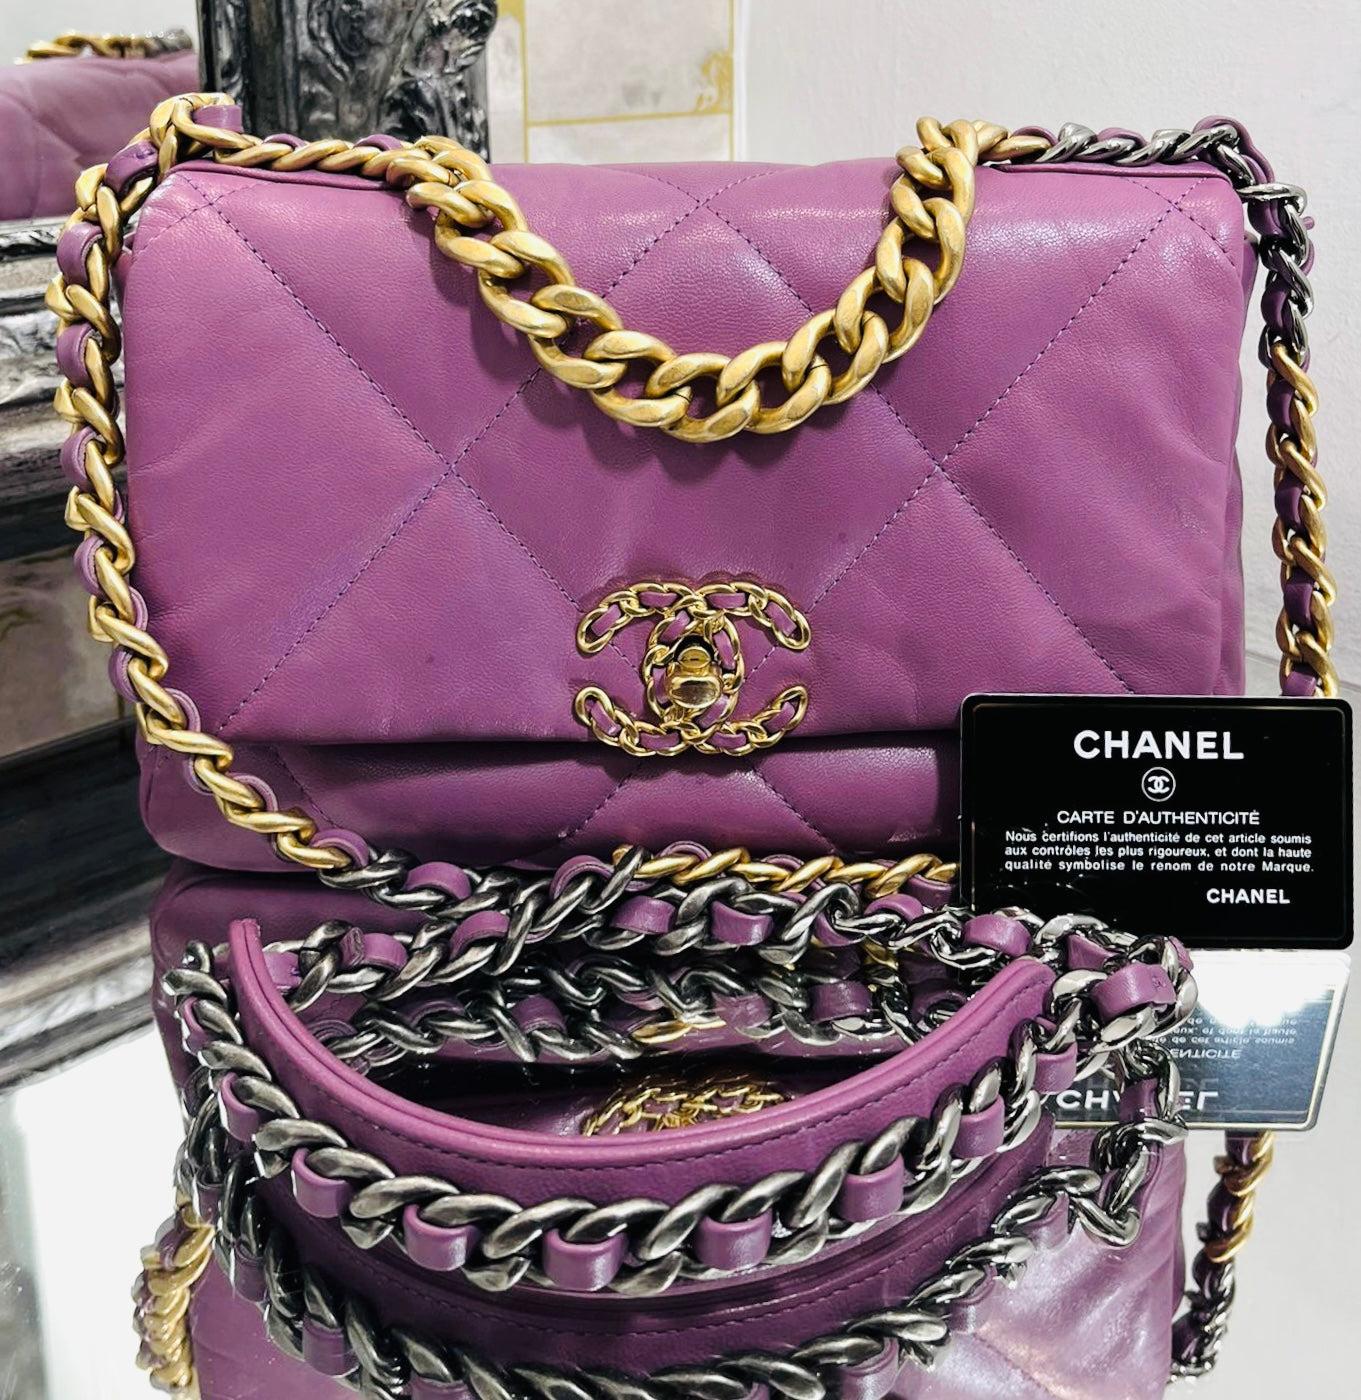 Chanel 19 Leather Flap Bag

Soft body, purple leather bag with diamond quilted shoulder bag. Features Chanel’s signature interlocking ‘CC’ turn-lock fastening. Leather and chain link shoulder strap,

triple colour hardware. Slip pocket to the rear